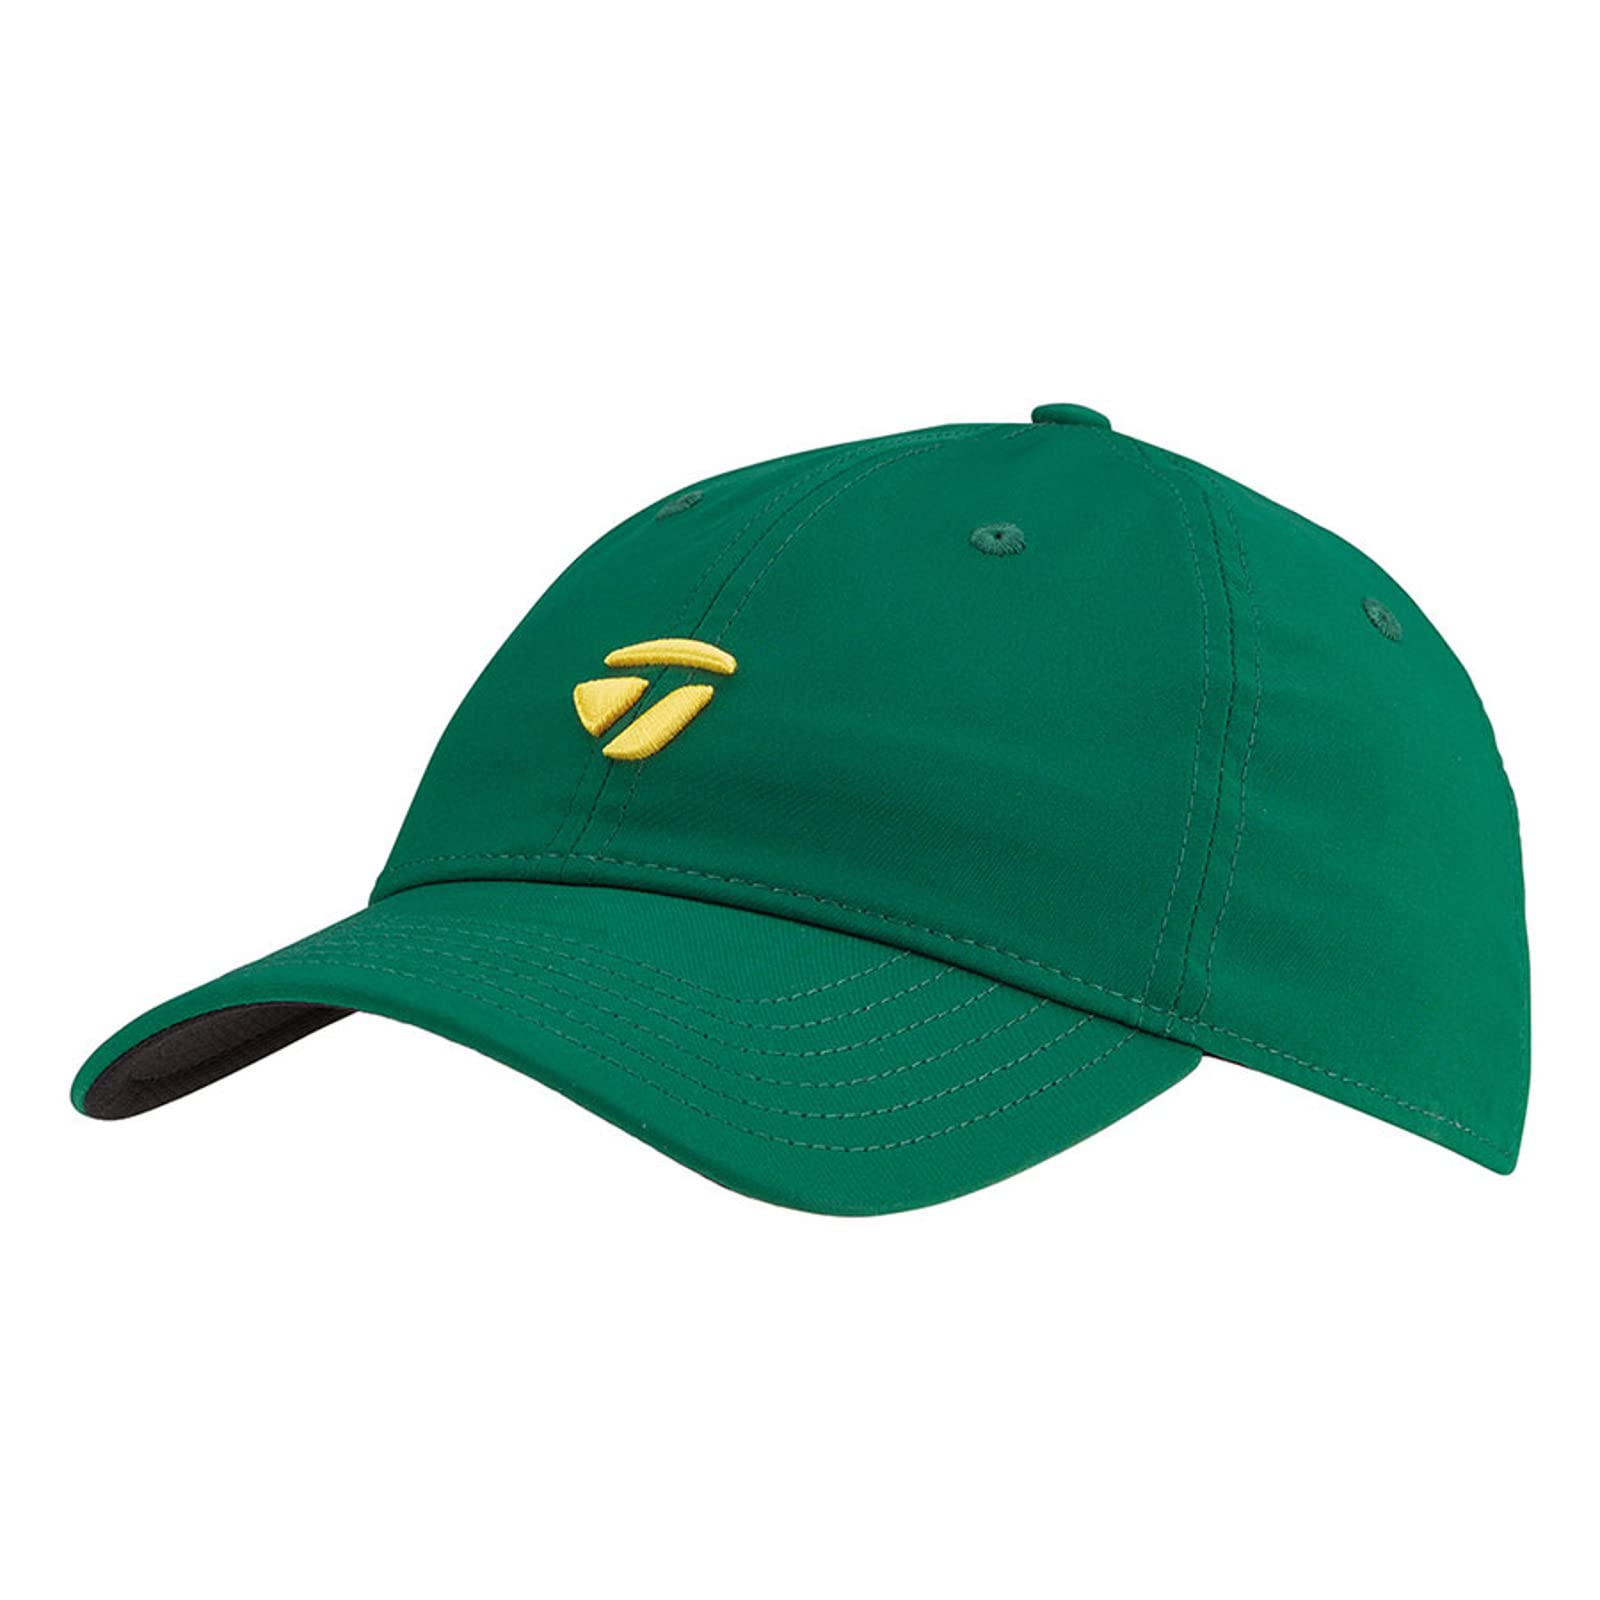 TaylorMade Tbug hat